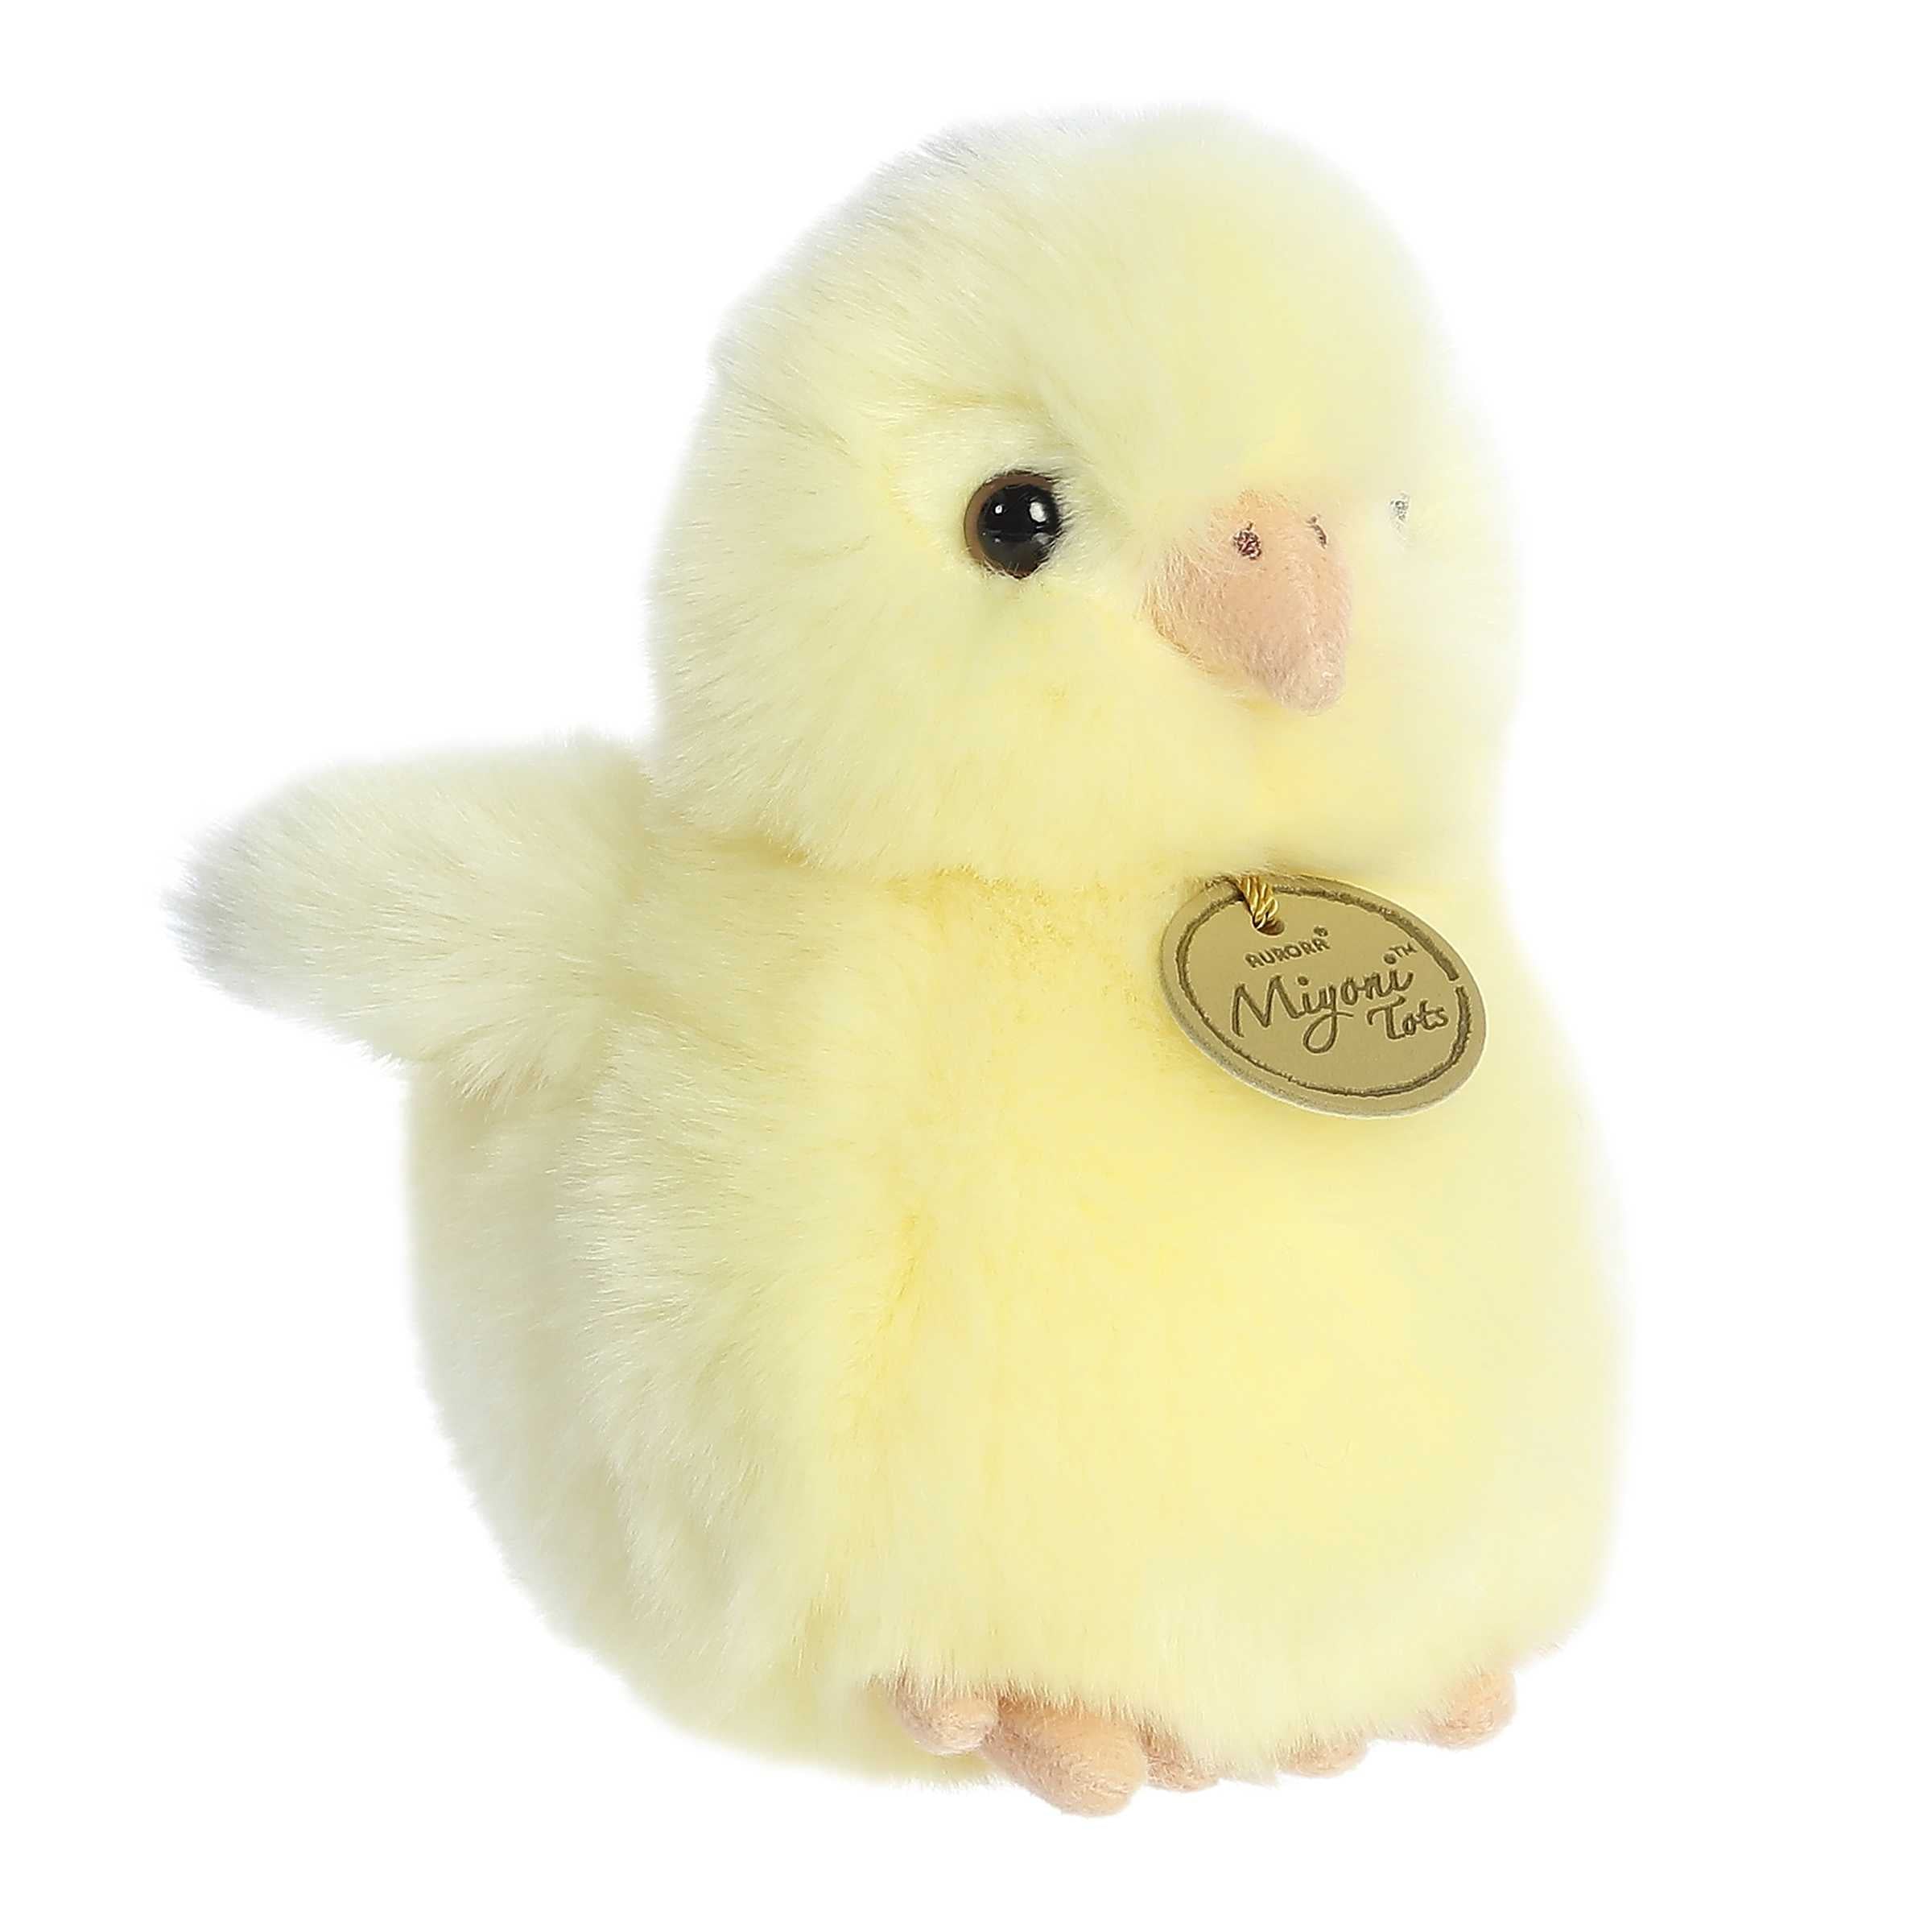 Fluffy yellow Ameraucana Chick plush with lifelike details, representing a unique breed, crafted by Aurora.